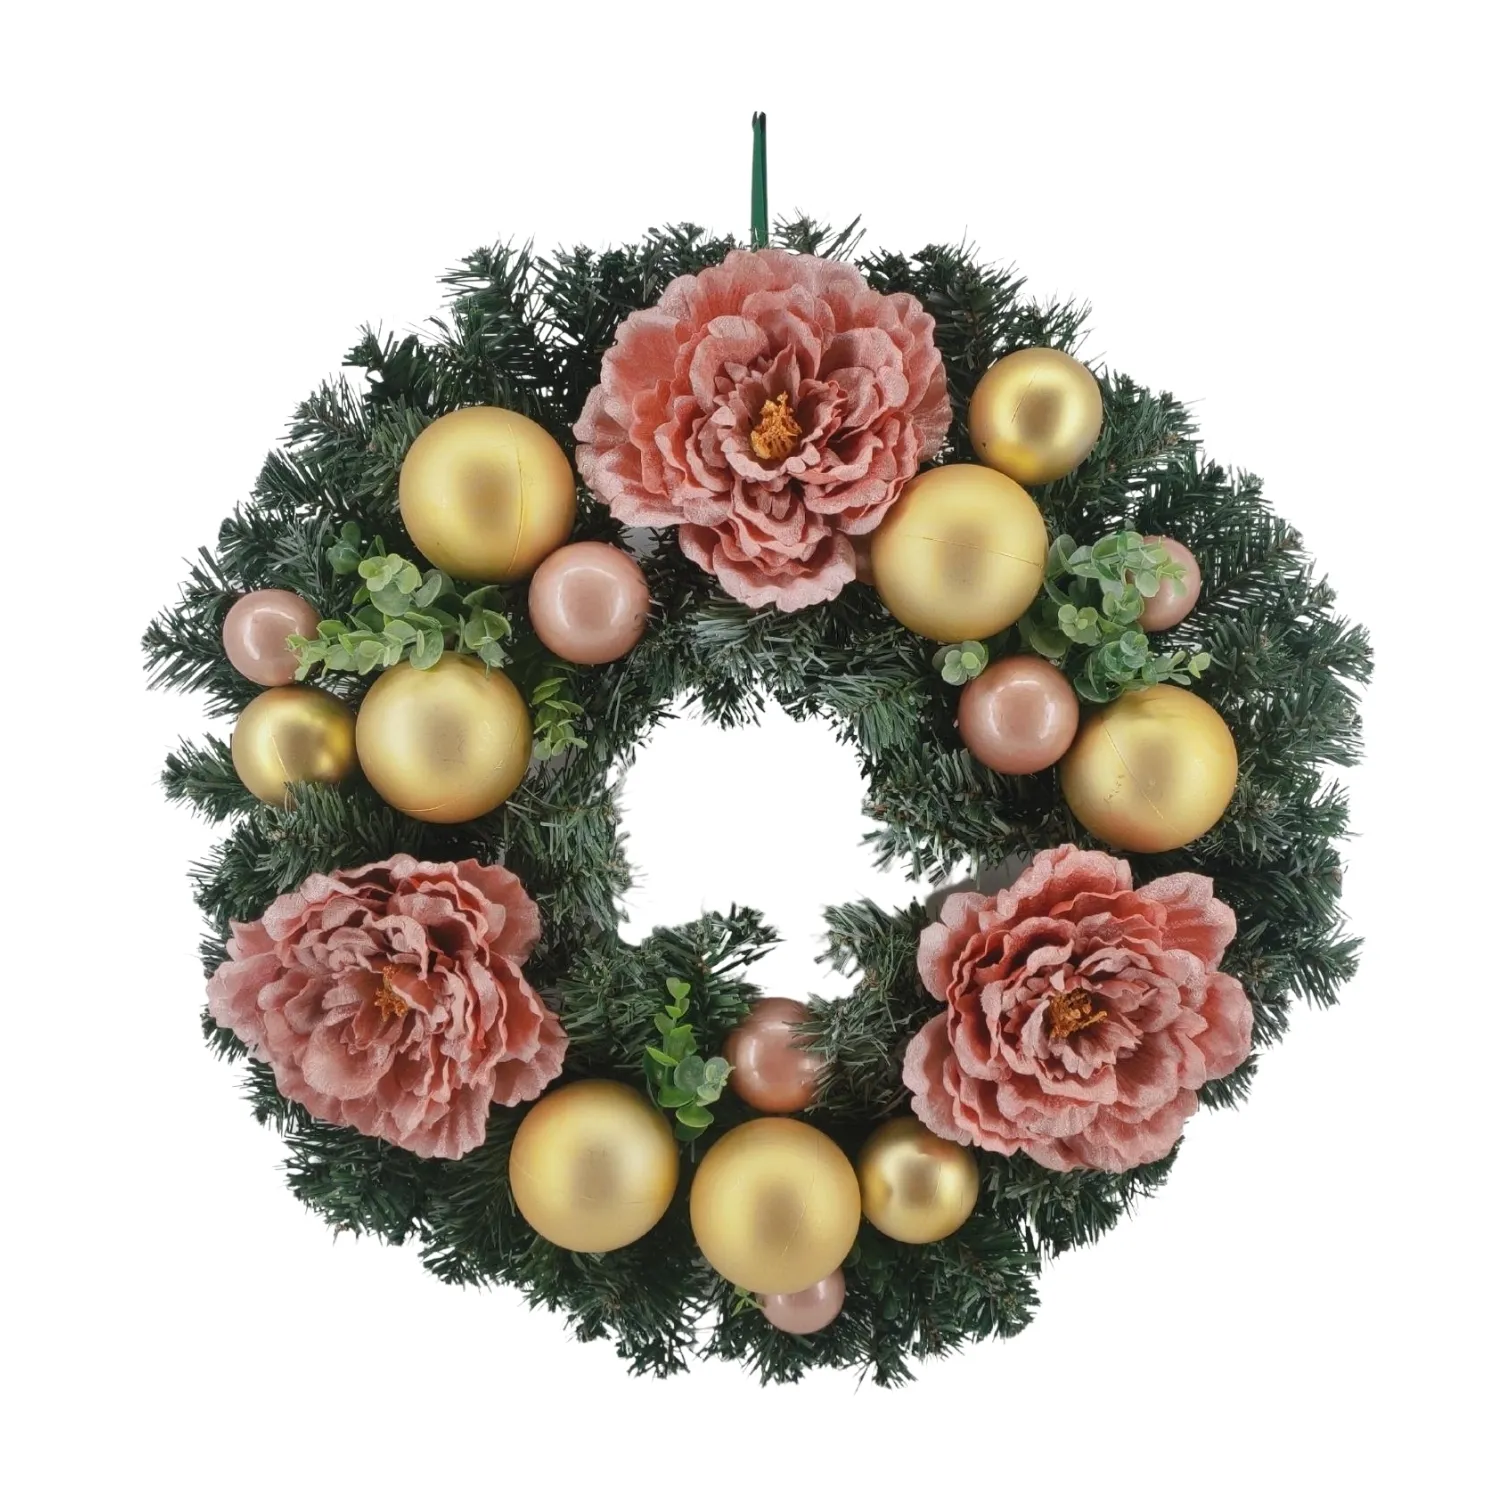 High Quality Christmas Decoration Decorated with Pink Peony and Ornaments Wholesale Christmas Wreath Large Christmas Wreath